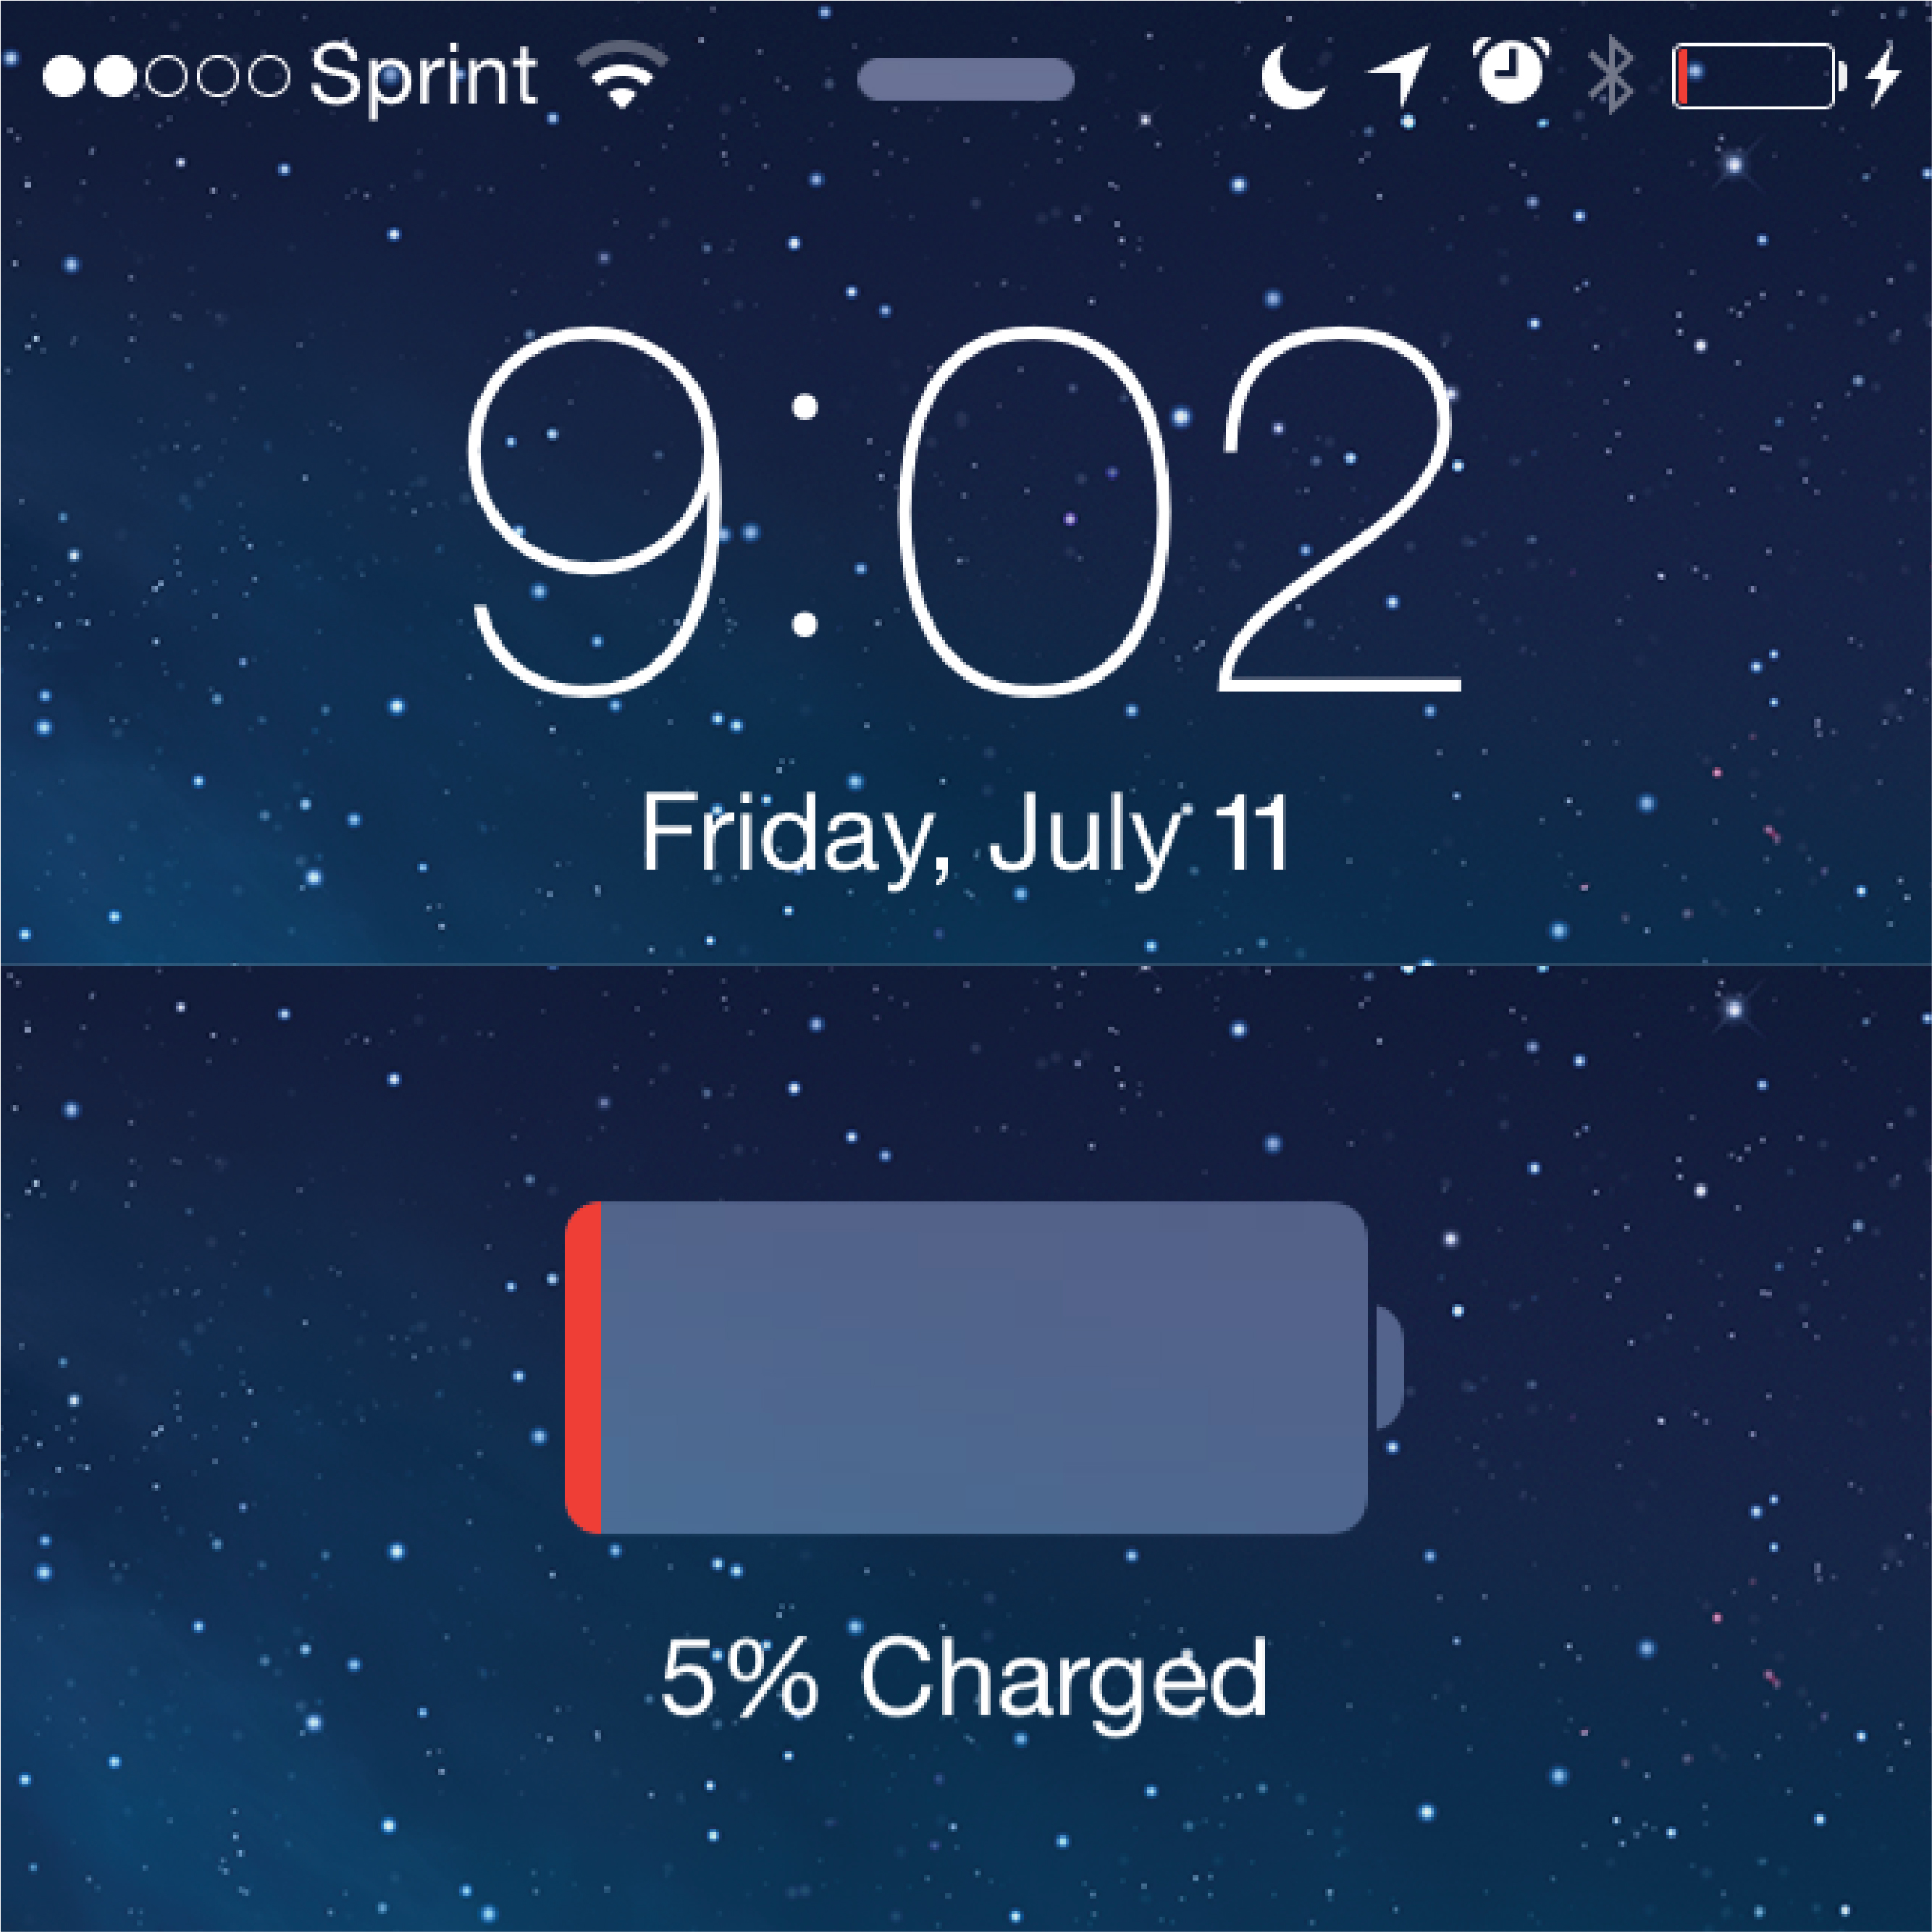 Screenshot of an iPhone showing 9:02, Friday, July 11. A night sky in the background image. The phone shows as plugged in and currently at 5% power.